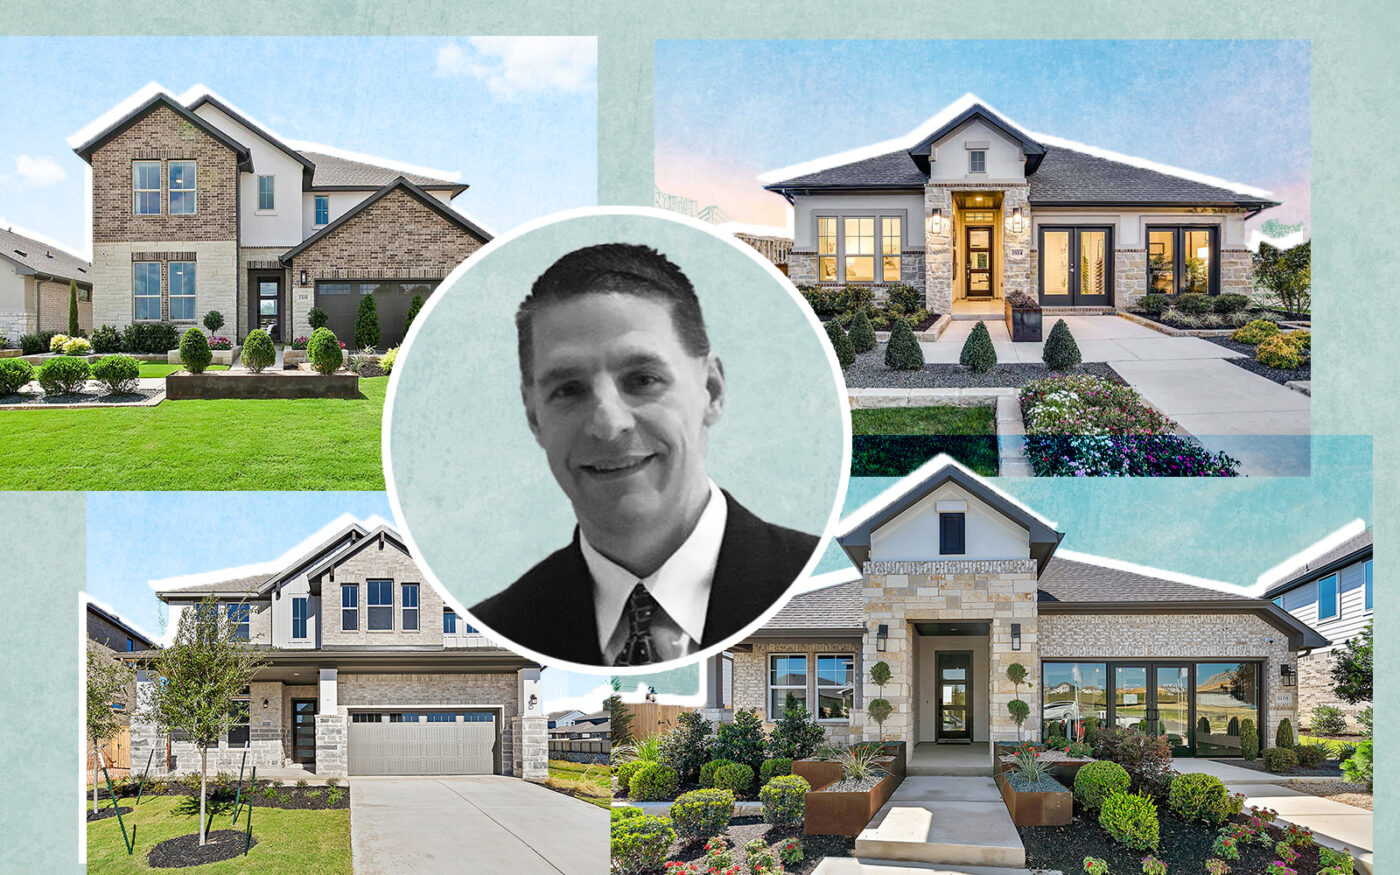 Tri Pointe Homes’ Bryan Havel and varying home styles at the Lariat Community in Liberty Hill